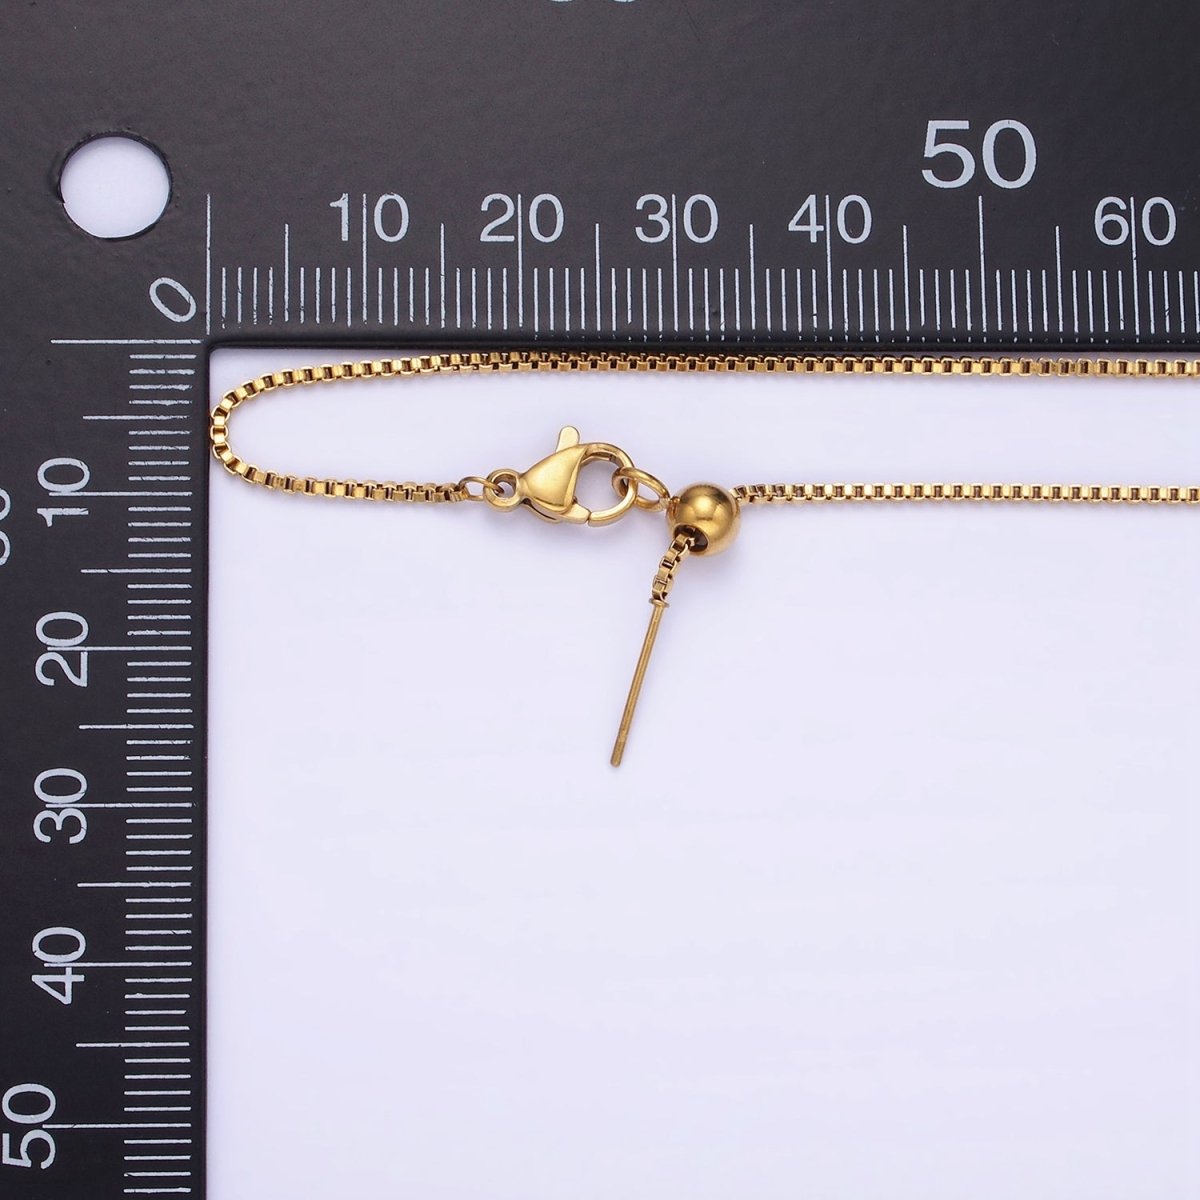 1.1mm Adjustable Box Chain Necklace Gold Up To 20" long | WA-2422 - DLUXCA